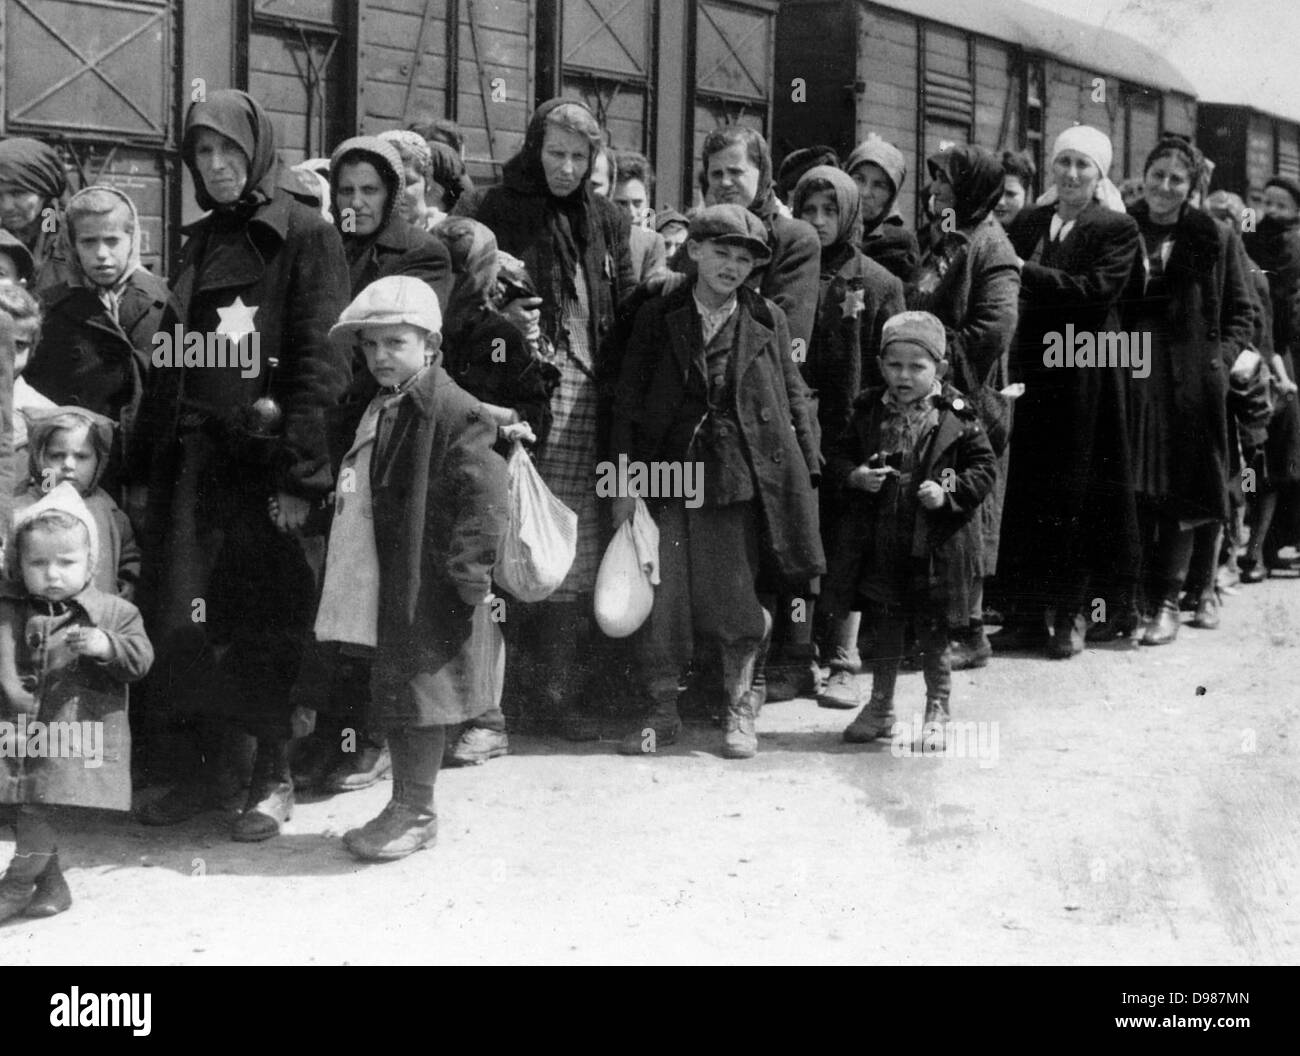 Women and children deported by train to death camps in Eastern Europe by the Nazi's c1942. Stock Photo